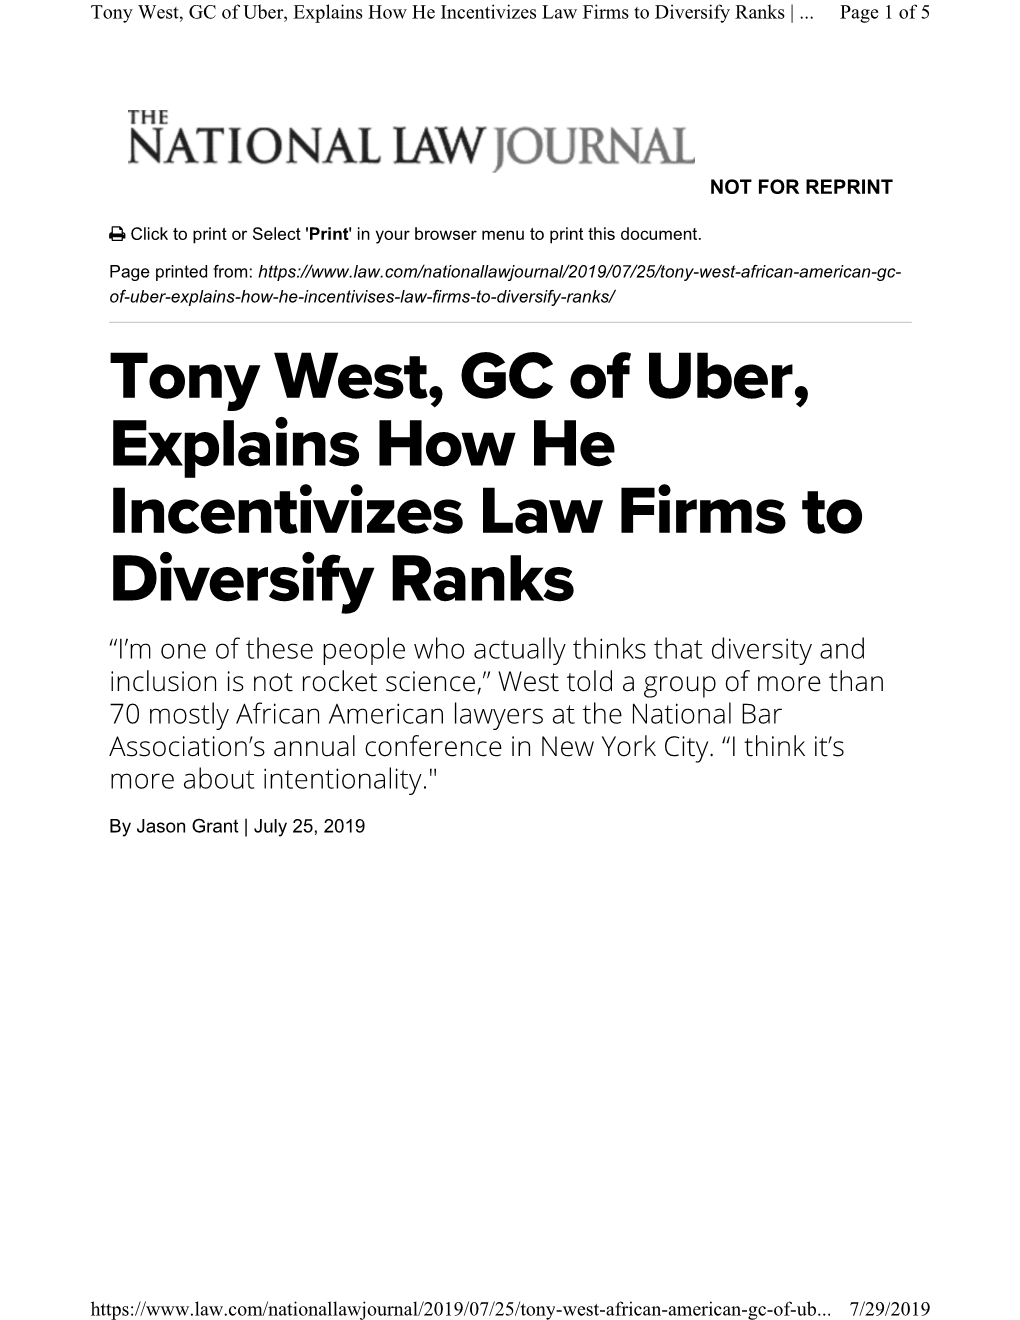 Tony West, GC of Uber, Explains How He Incentivizes Law Firms to Diversify Ranks |